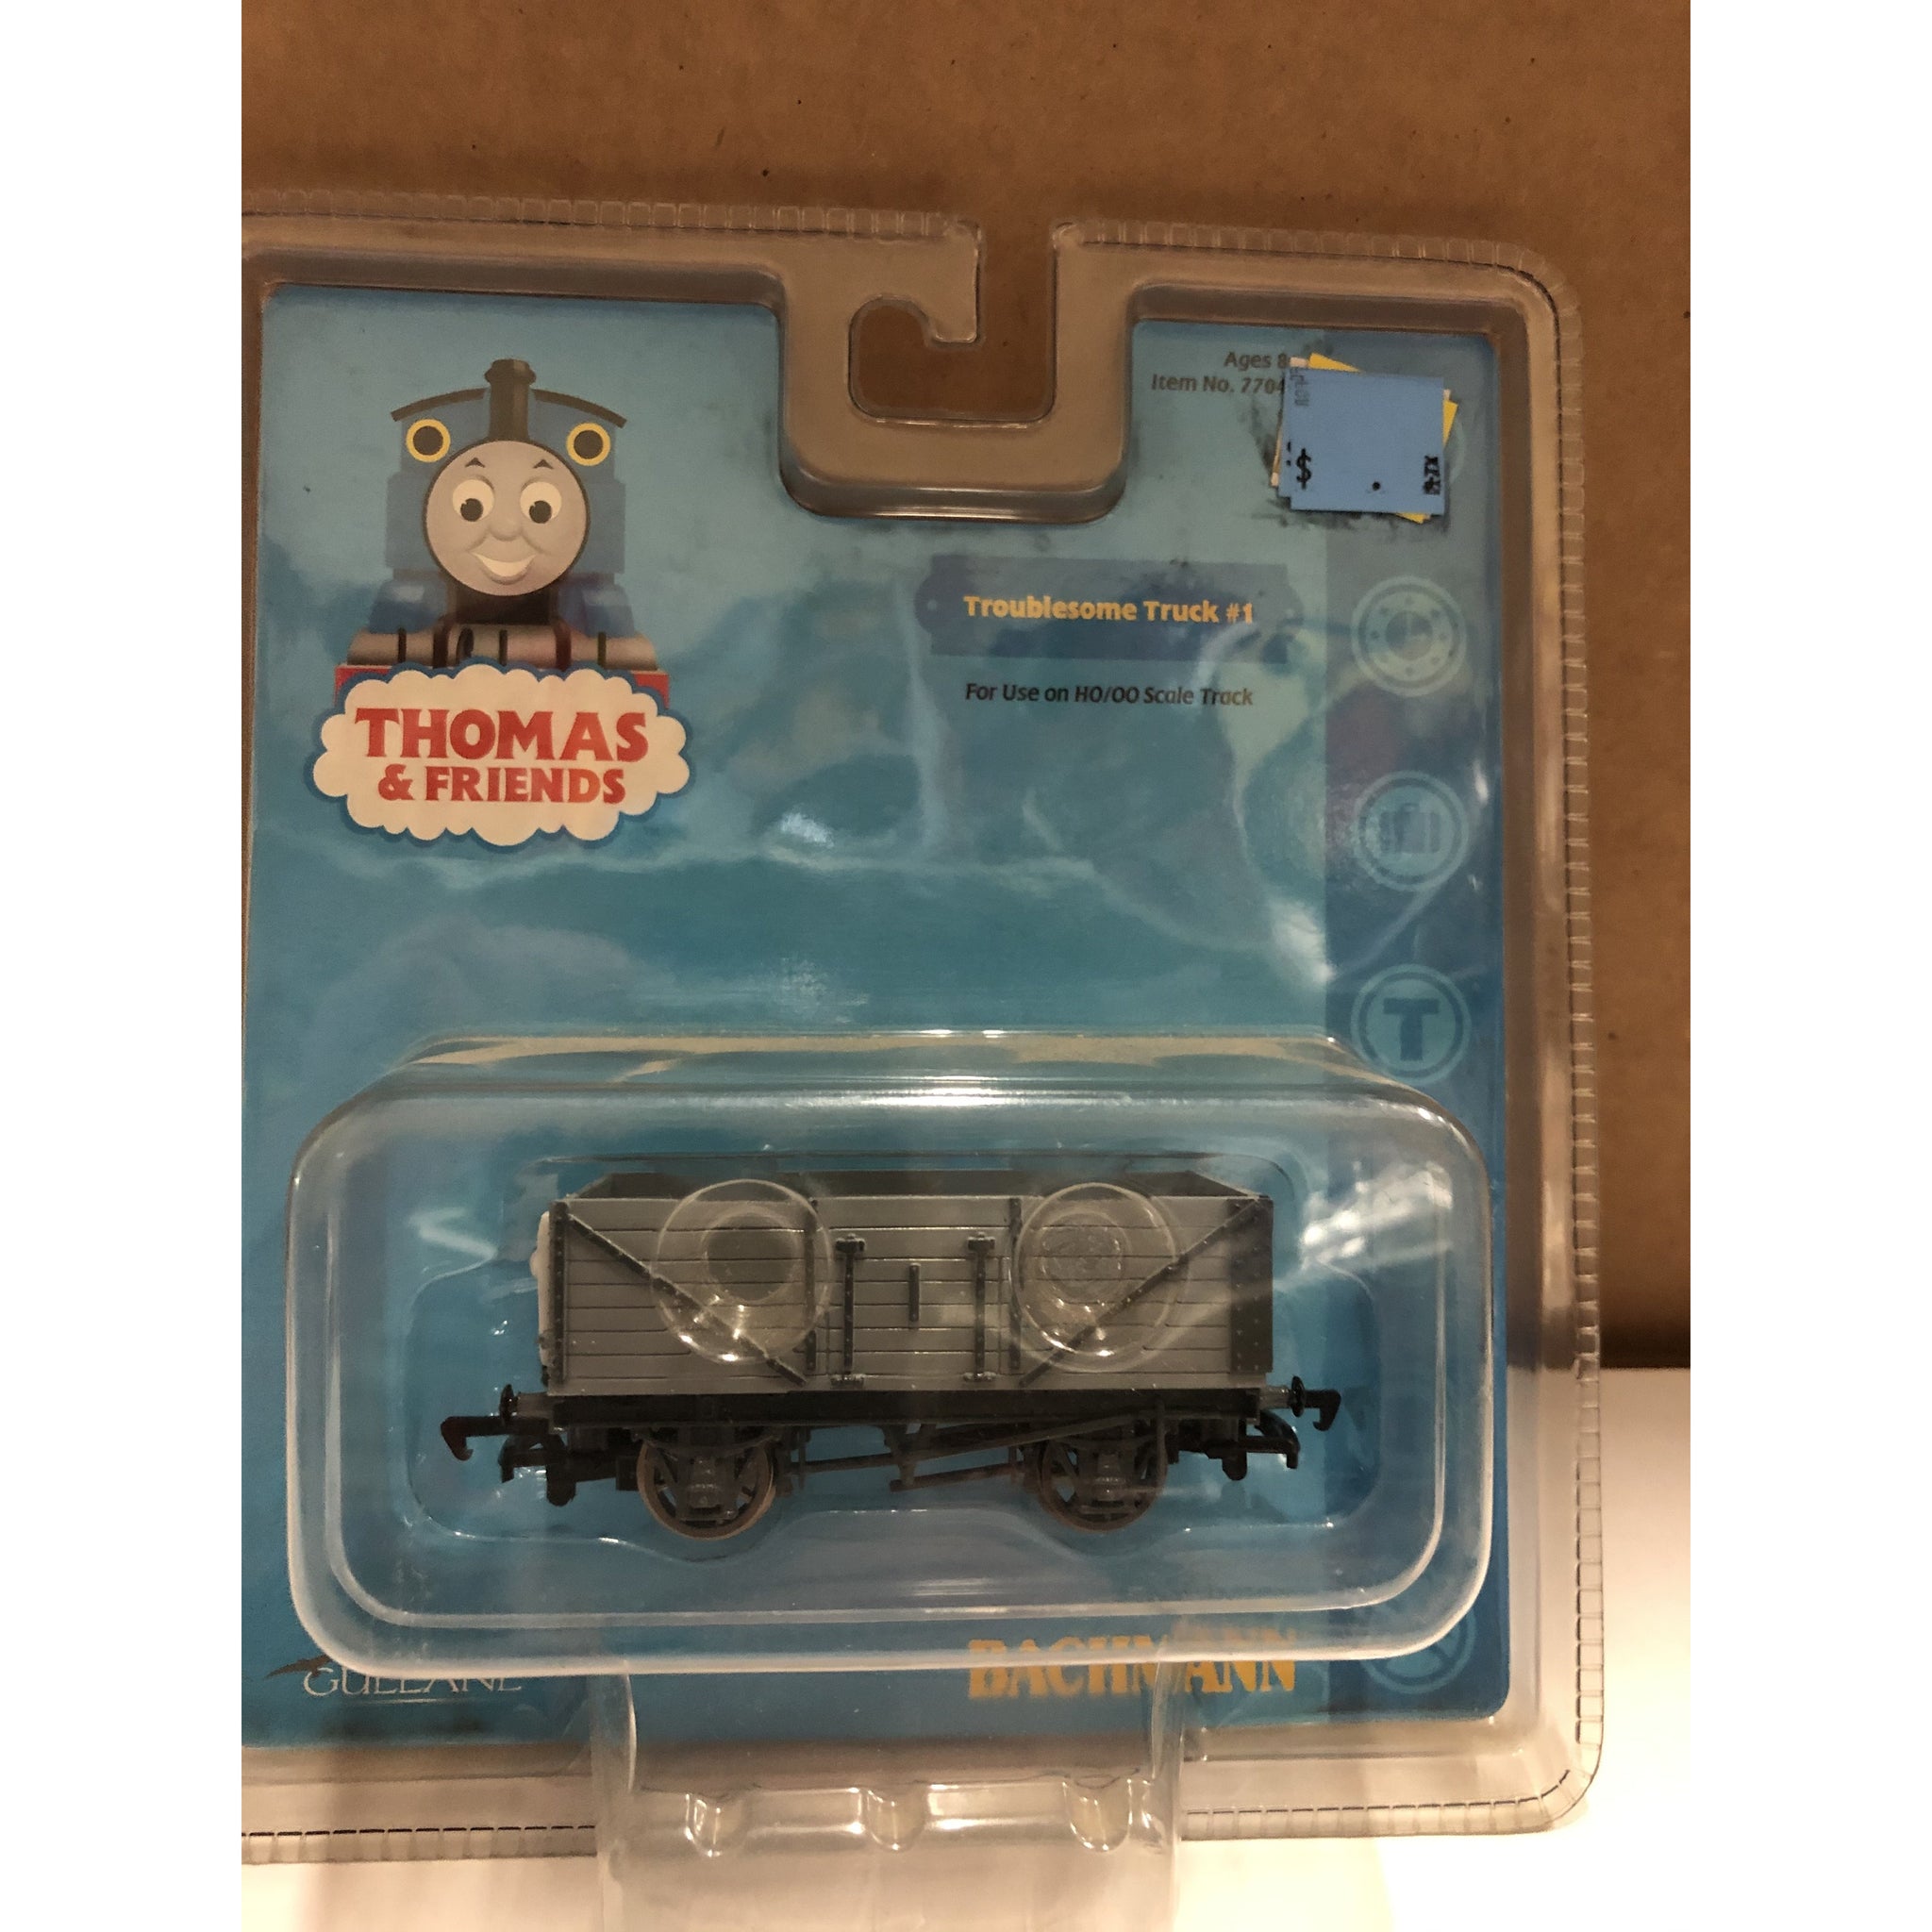 HO Scale Bachmann 77046 Troublesome Truck #1 – Swasey's Hardware & Hobbies